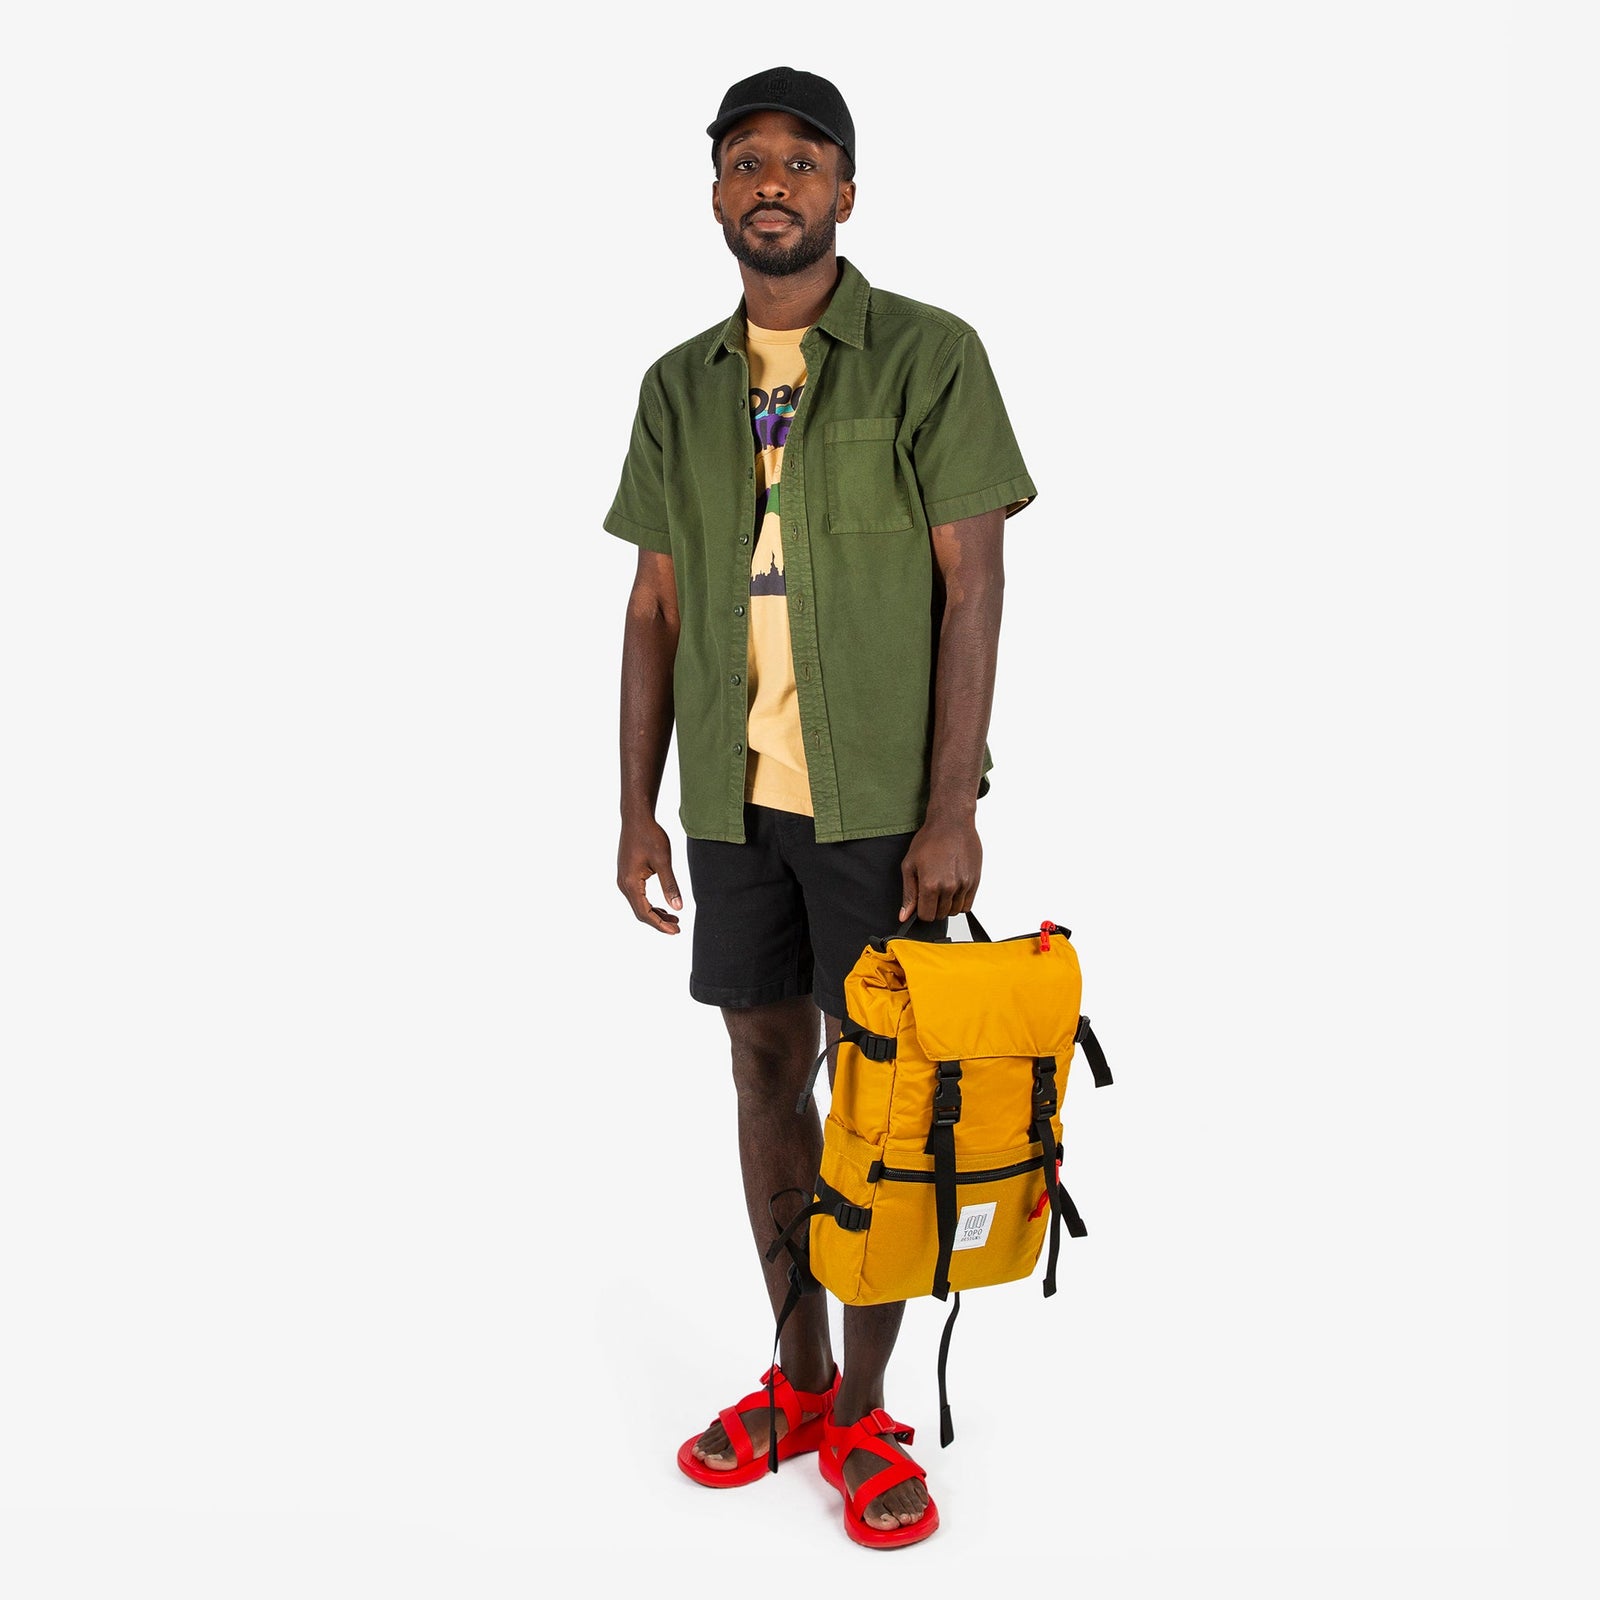 Topo Designs Rover Pack Classic in "Mustard" yellow held by model with top carry handle.